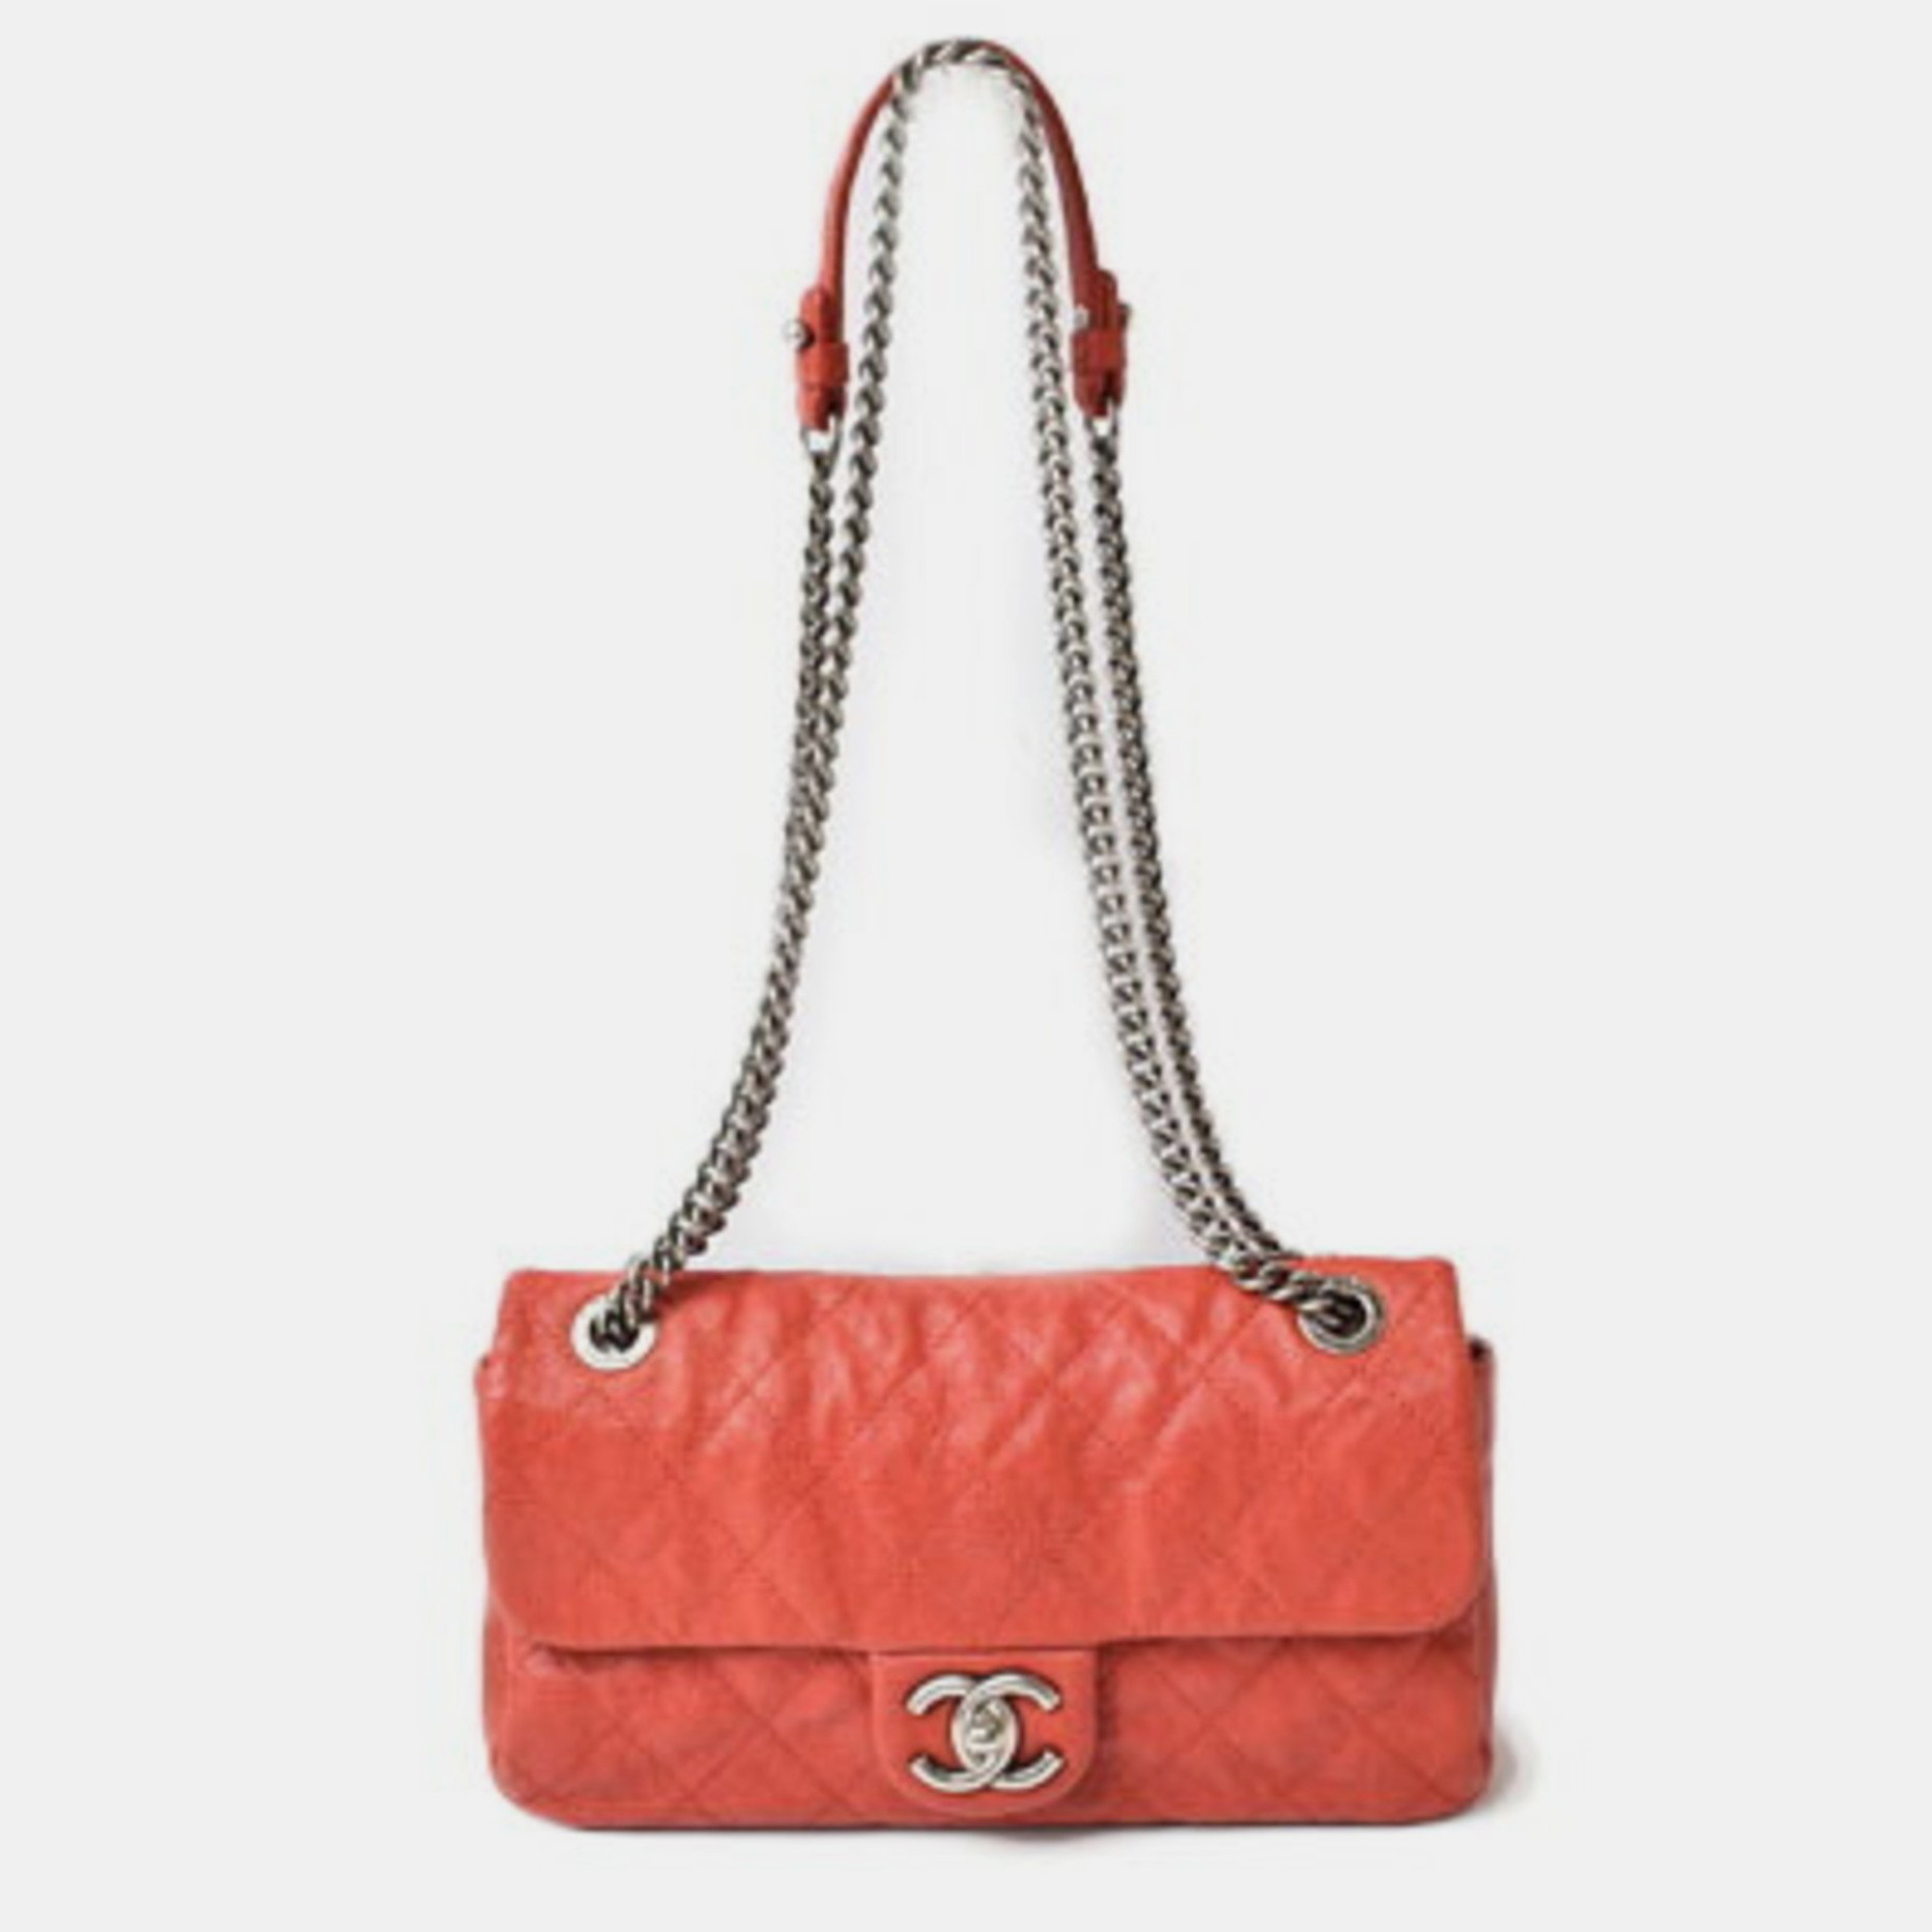 Chanel red caviar quilted mini simply cc flap bag